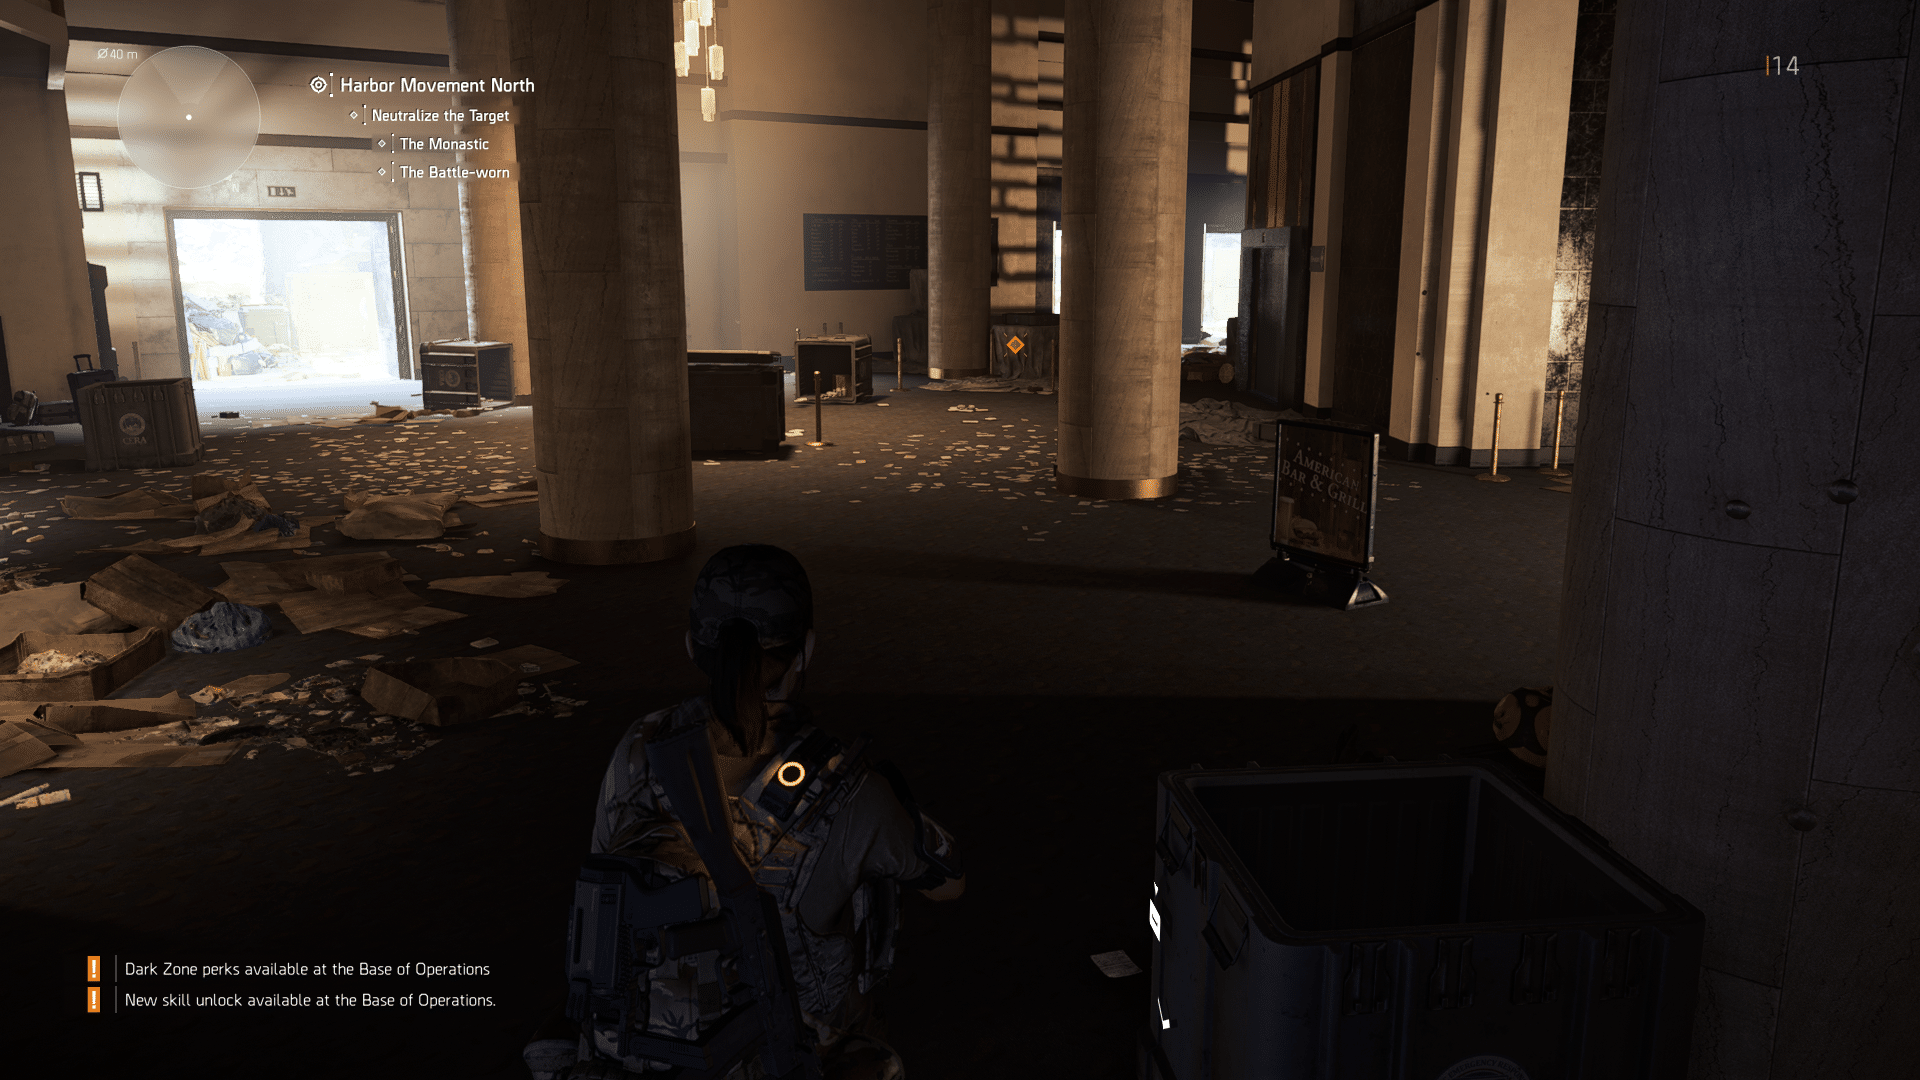 TheDivision2 4 1 2019 8 49 26 PM 456